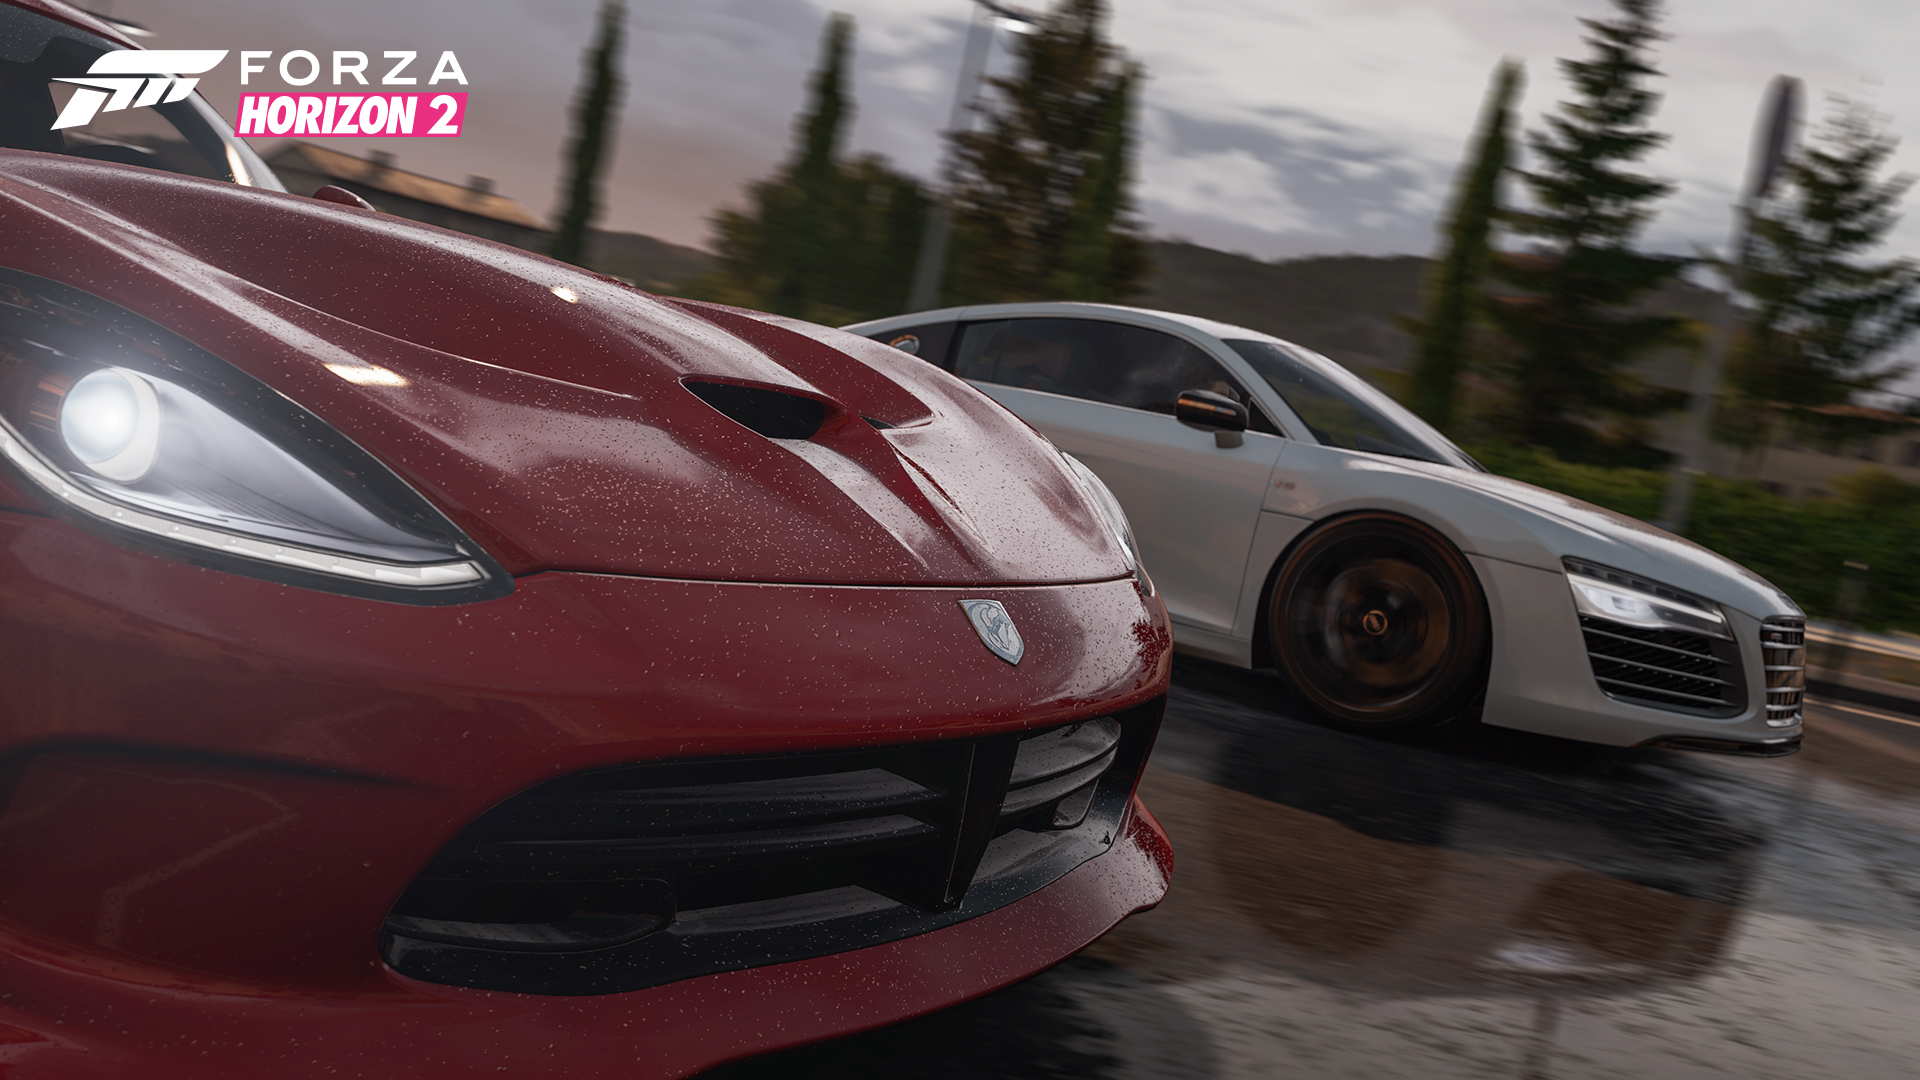 Forza Motorsport 8 Release Date Could Be Delayed Into Q3 2023 -  GameRevolution